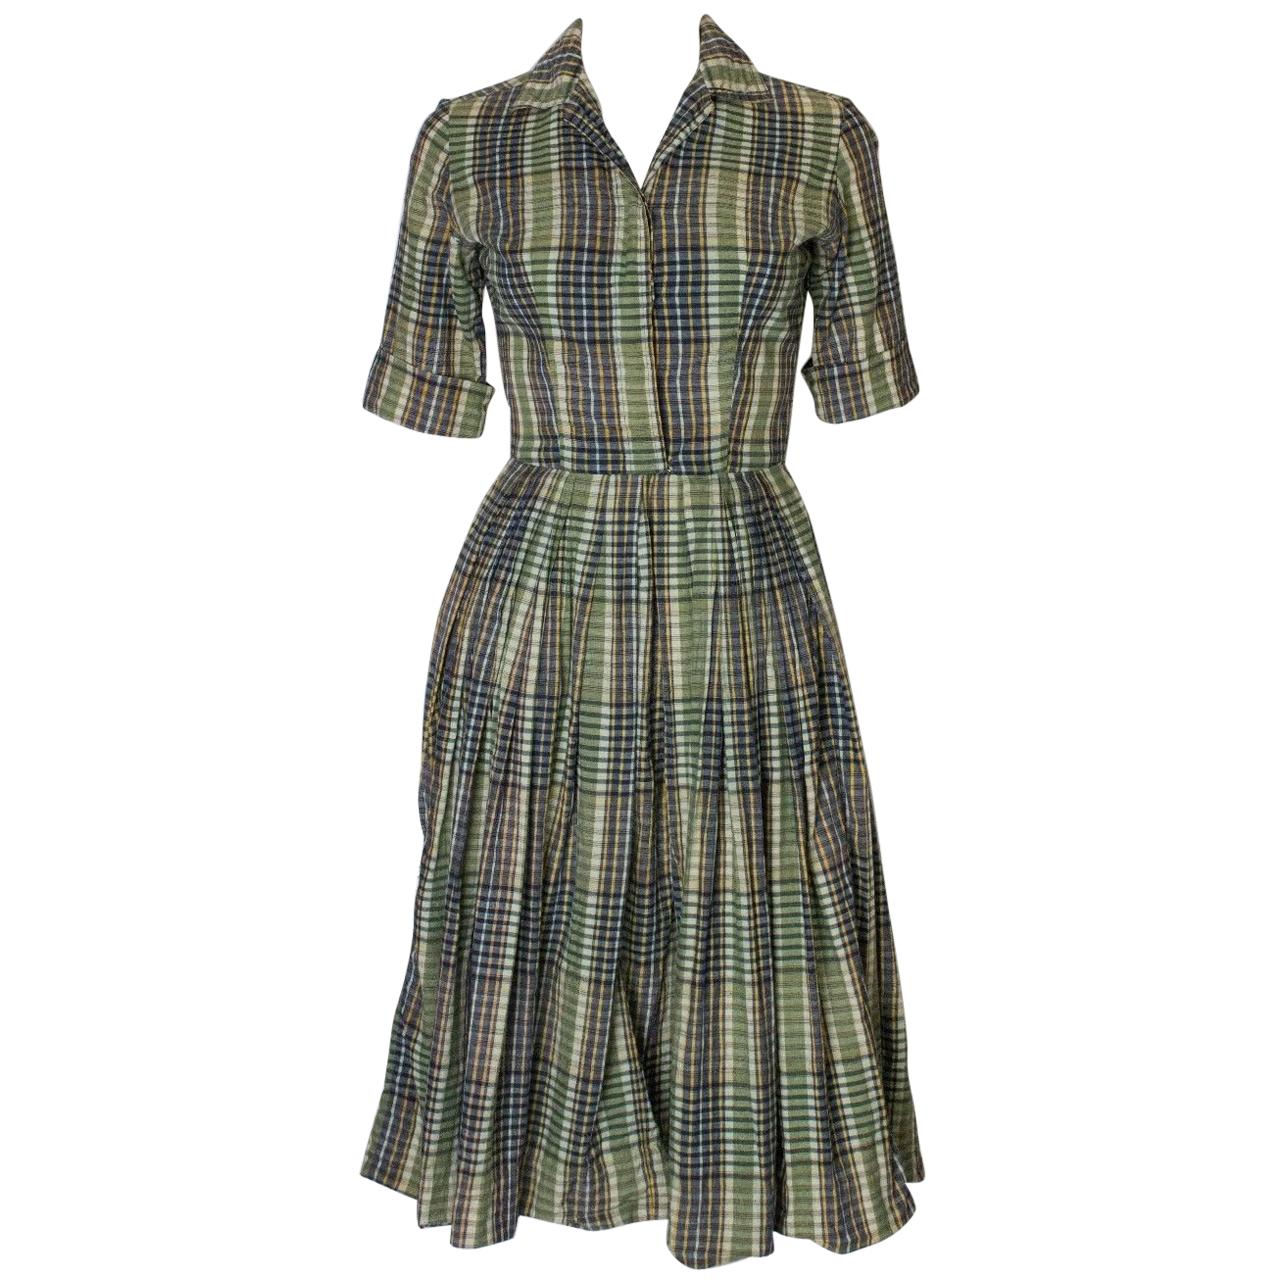 A vintage 1950s gingham striped cotton day dress by Neiman Marcus